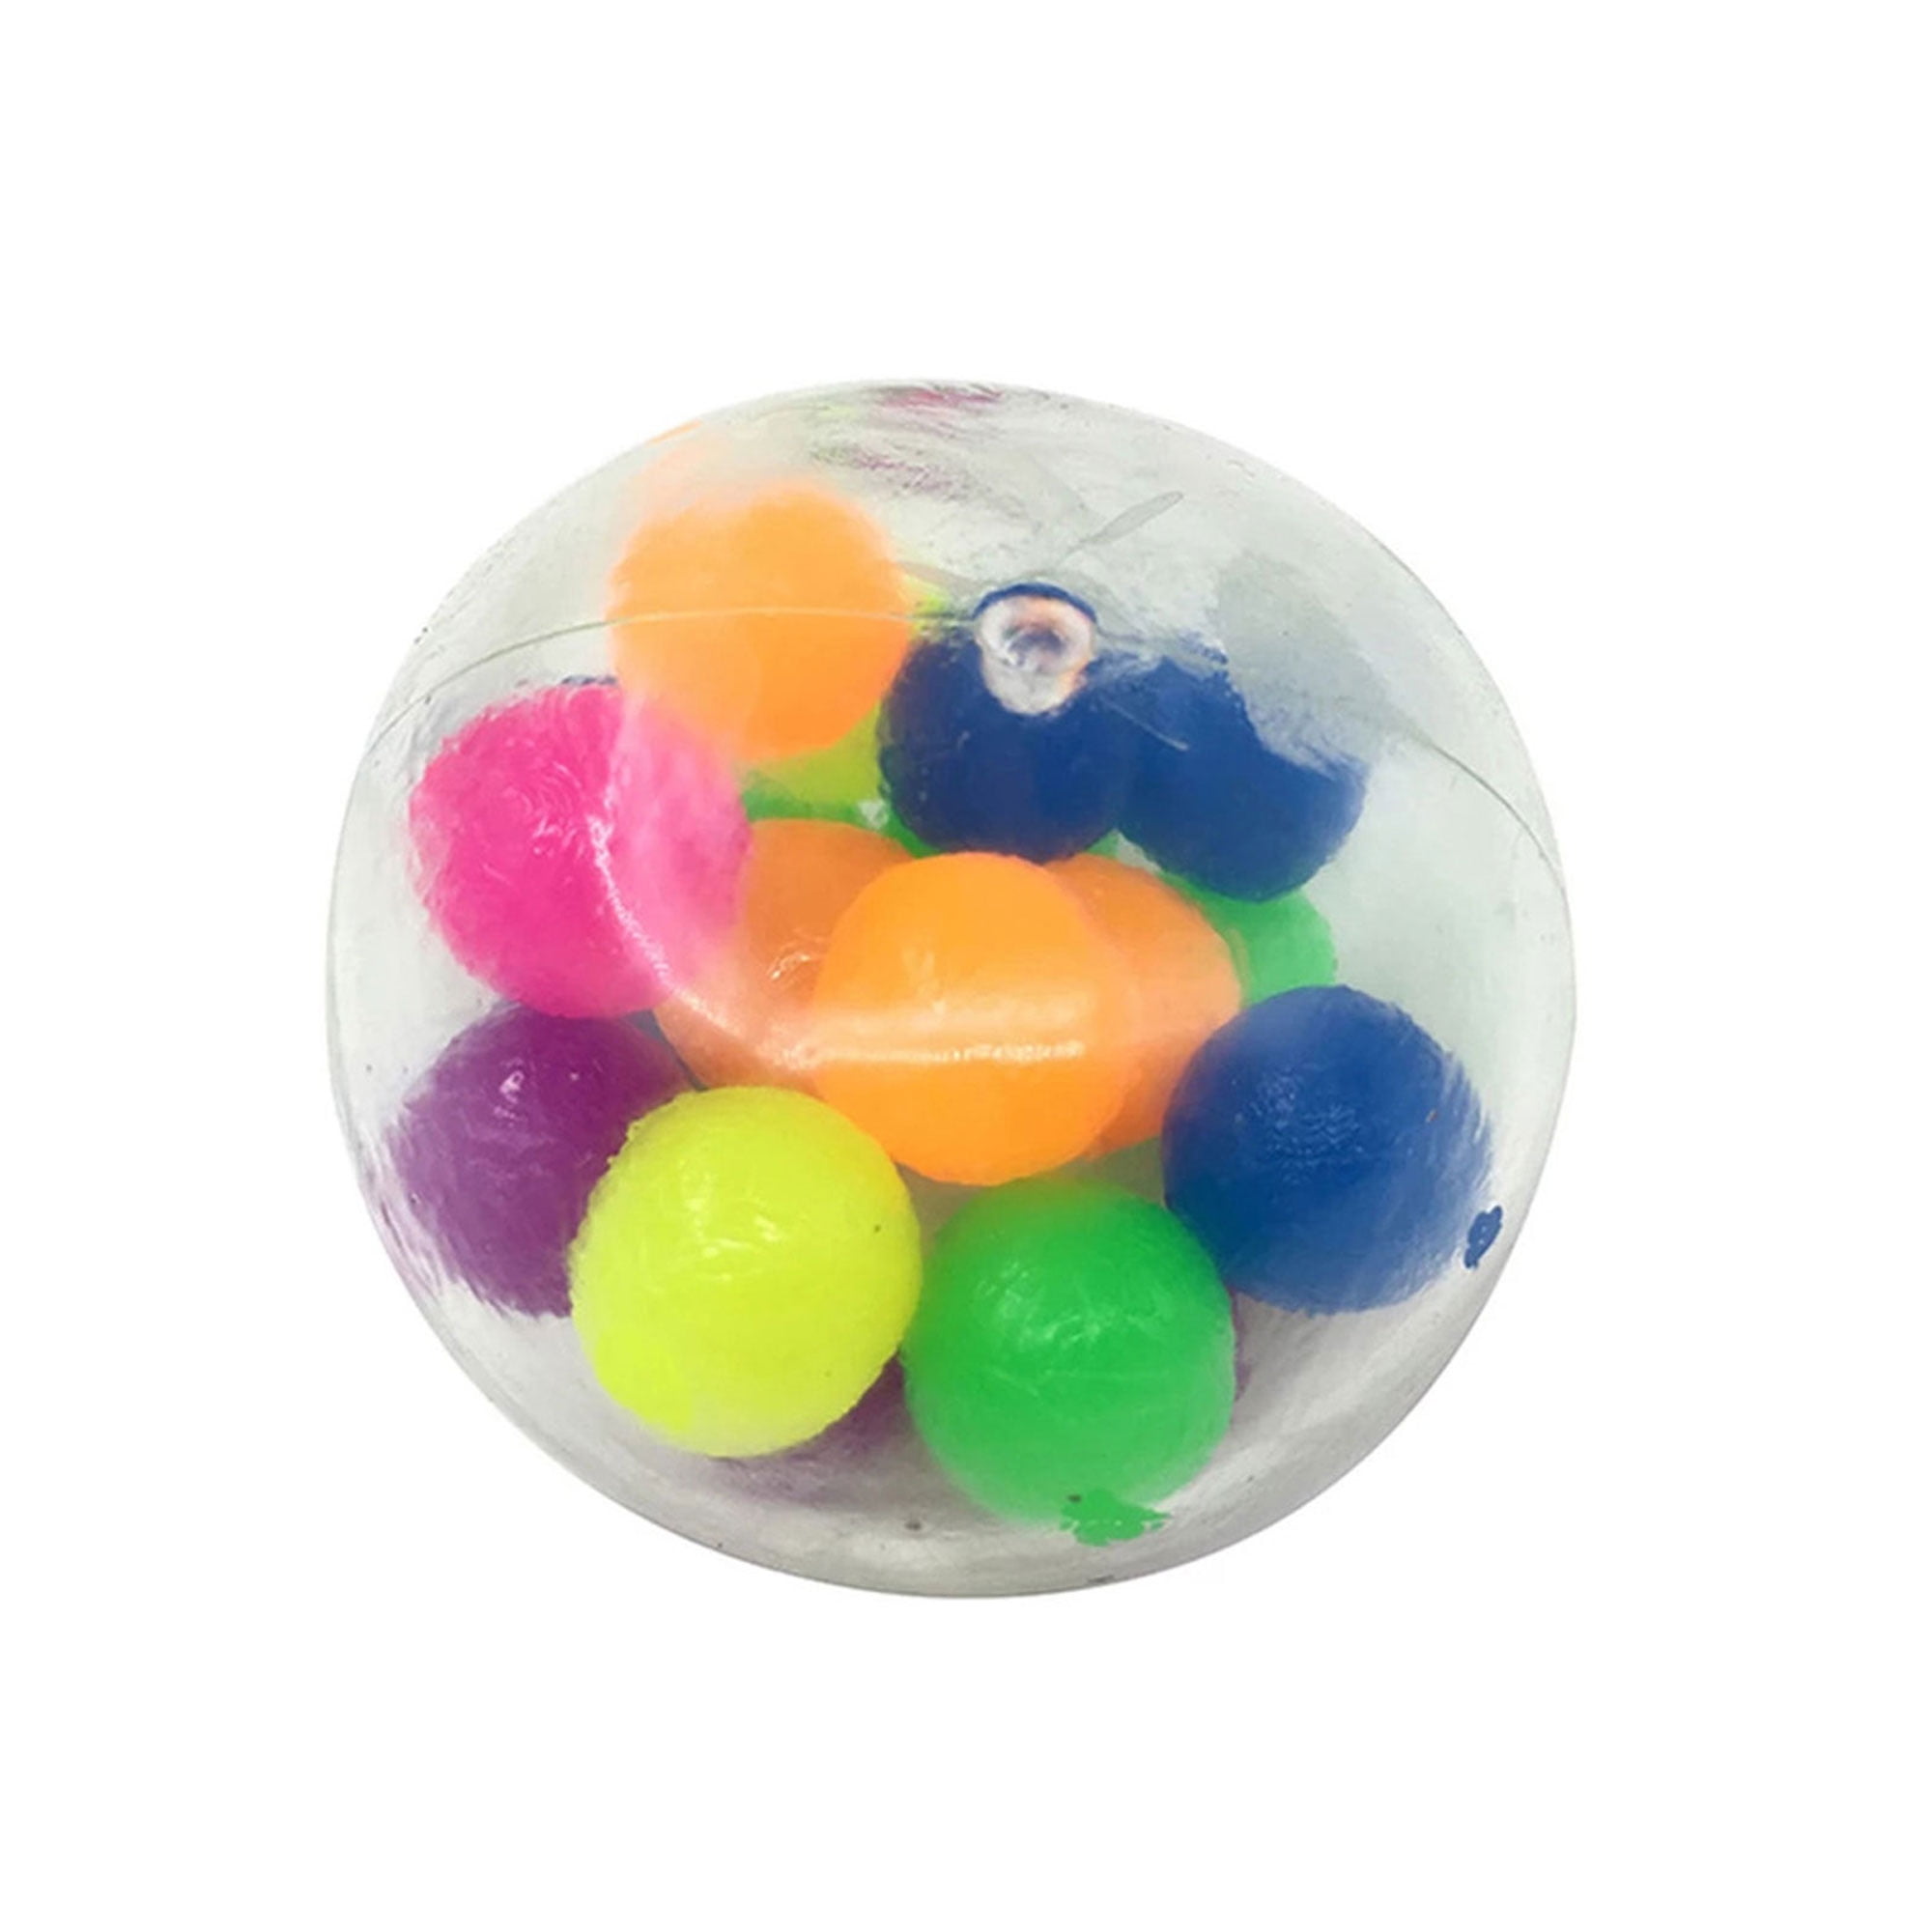 Details about   DNA Squish Stress Ball by Special Supplies 4-Pack 